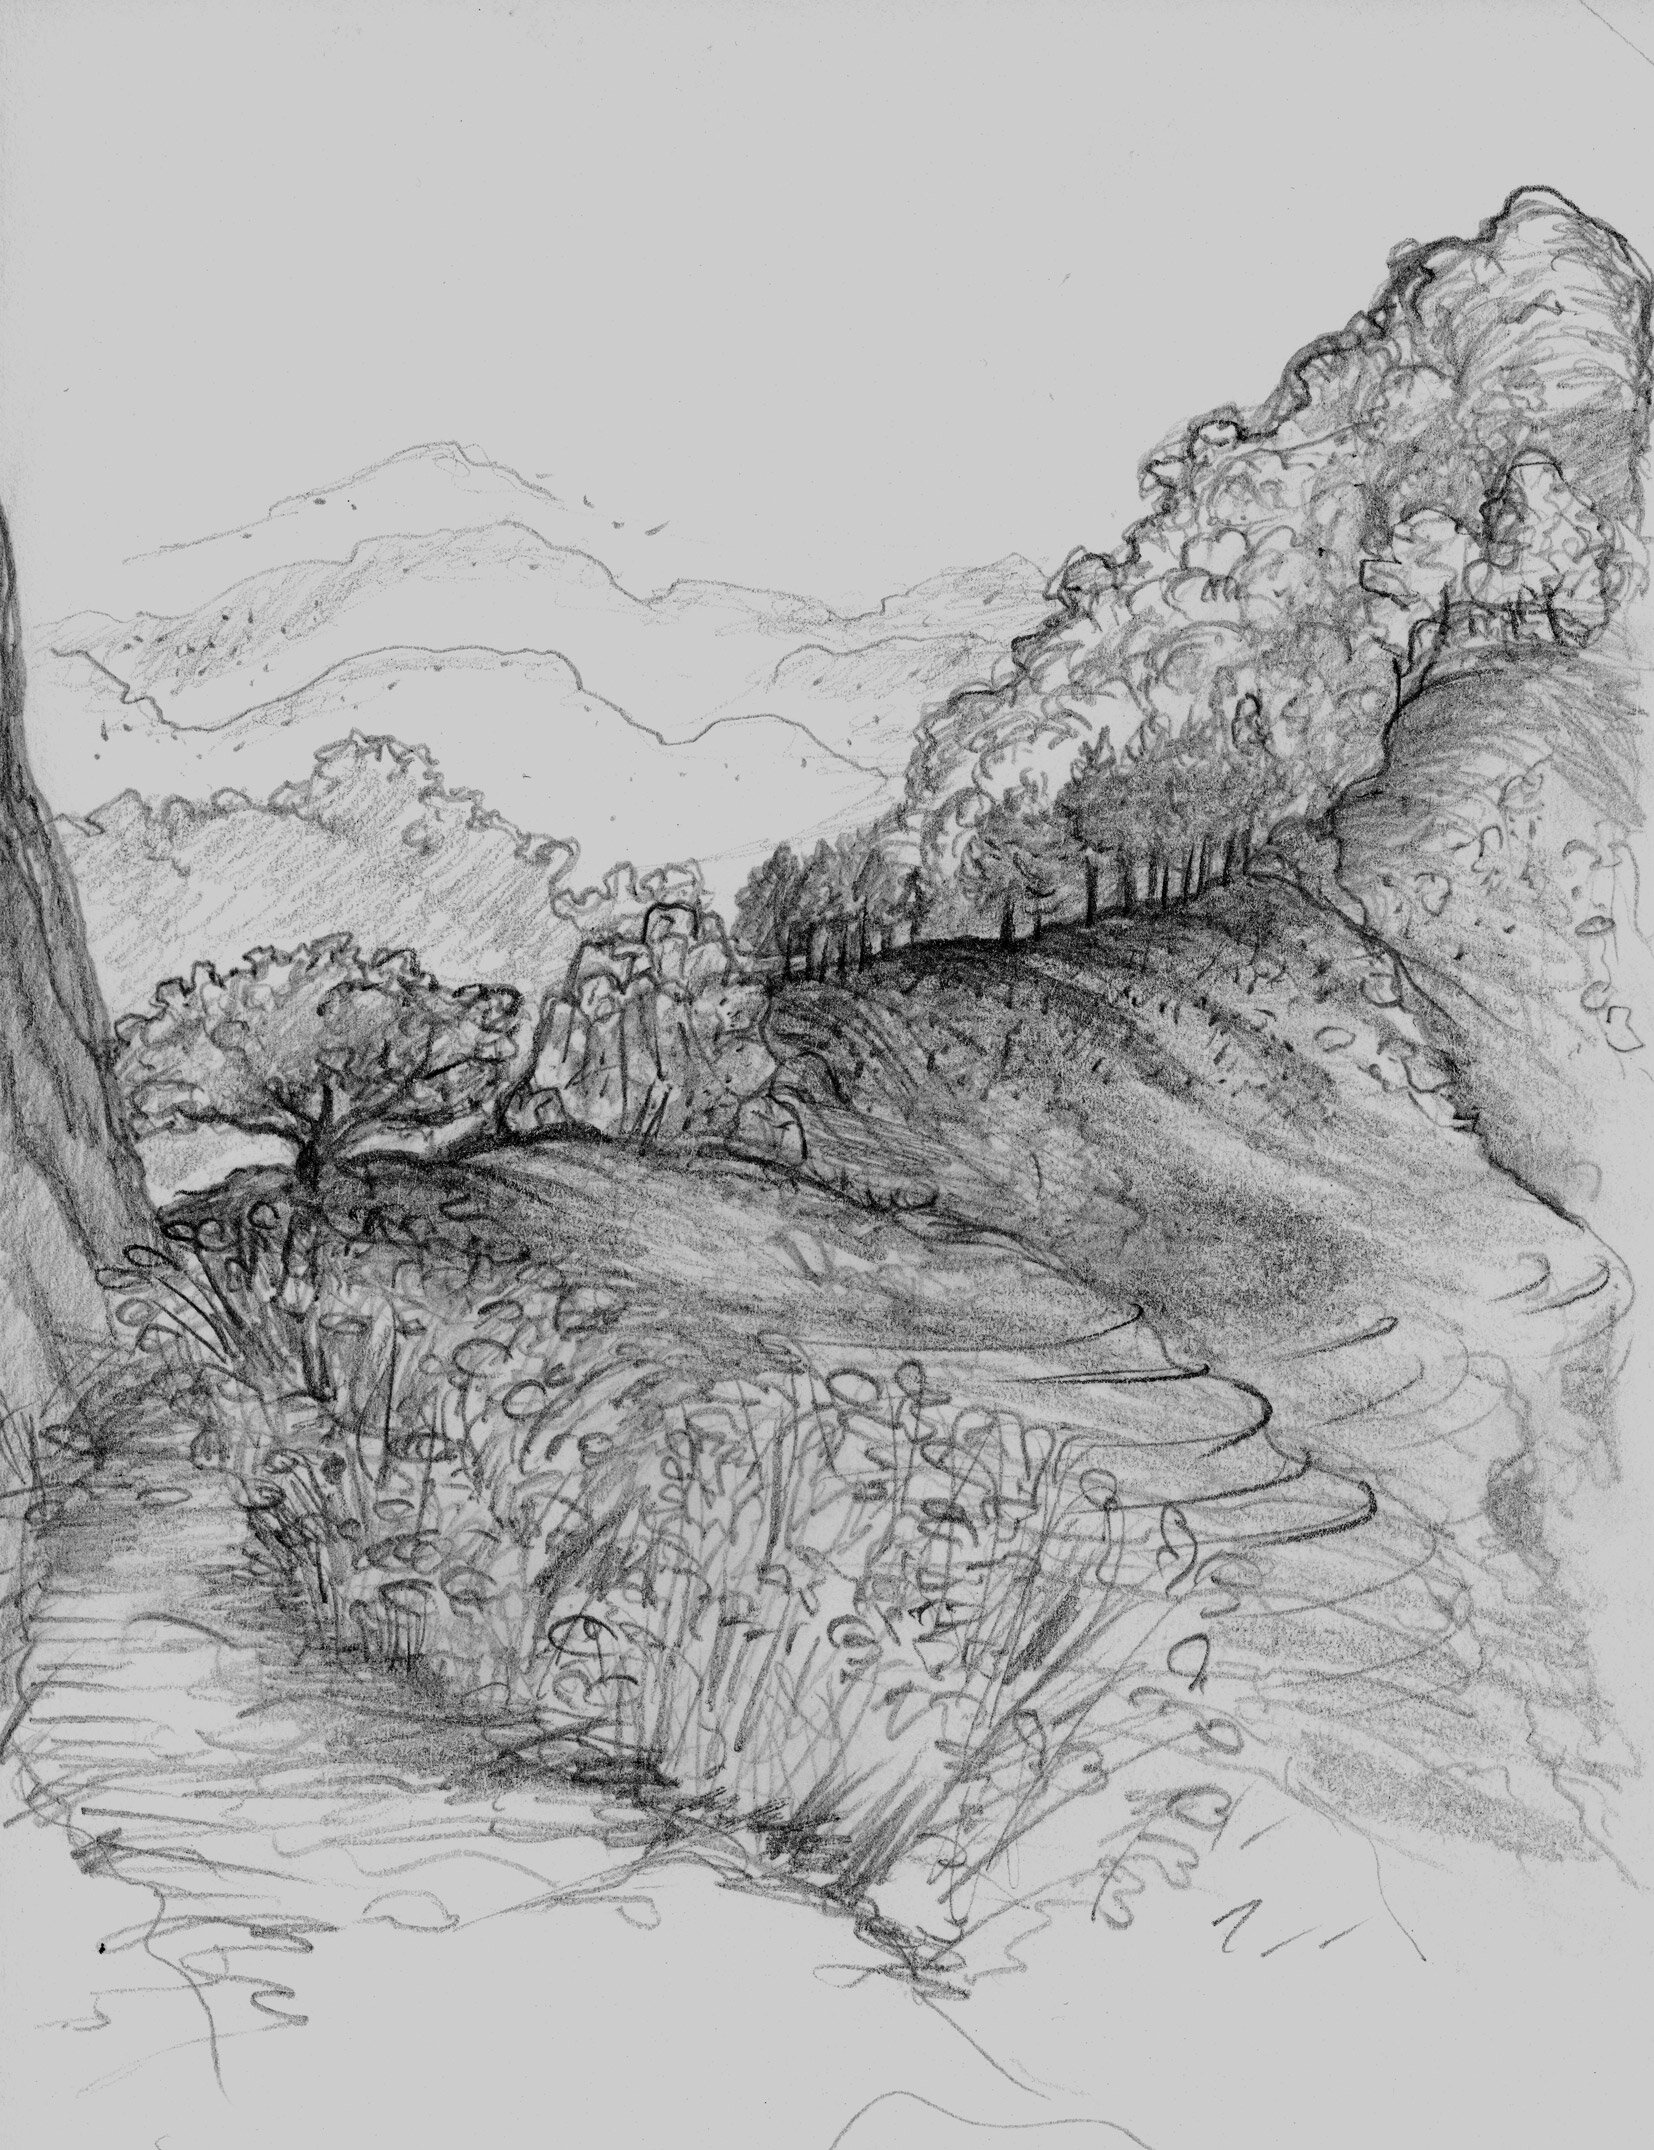   Bandipur Nepal Path to Ramkot  2014 Pencil on paper 7x5 inches 